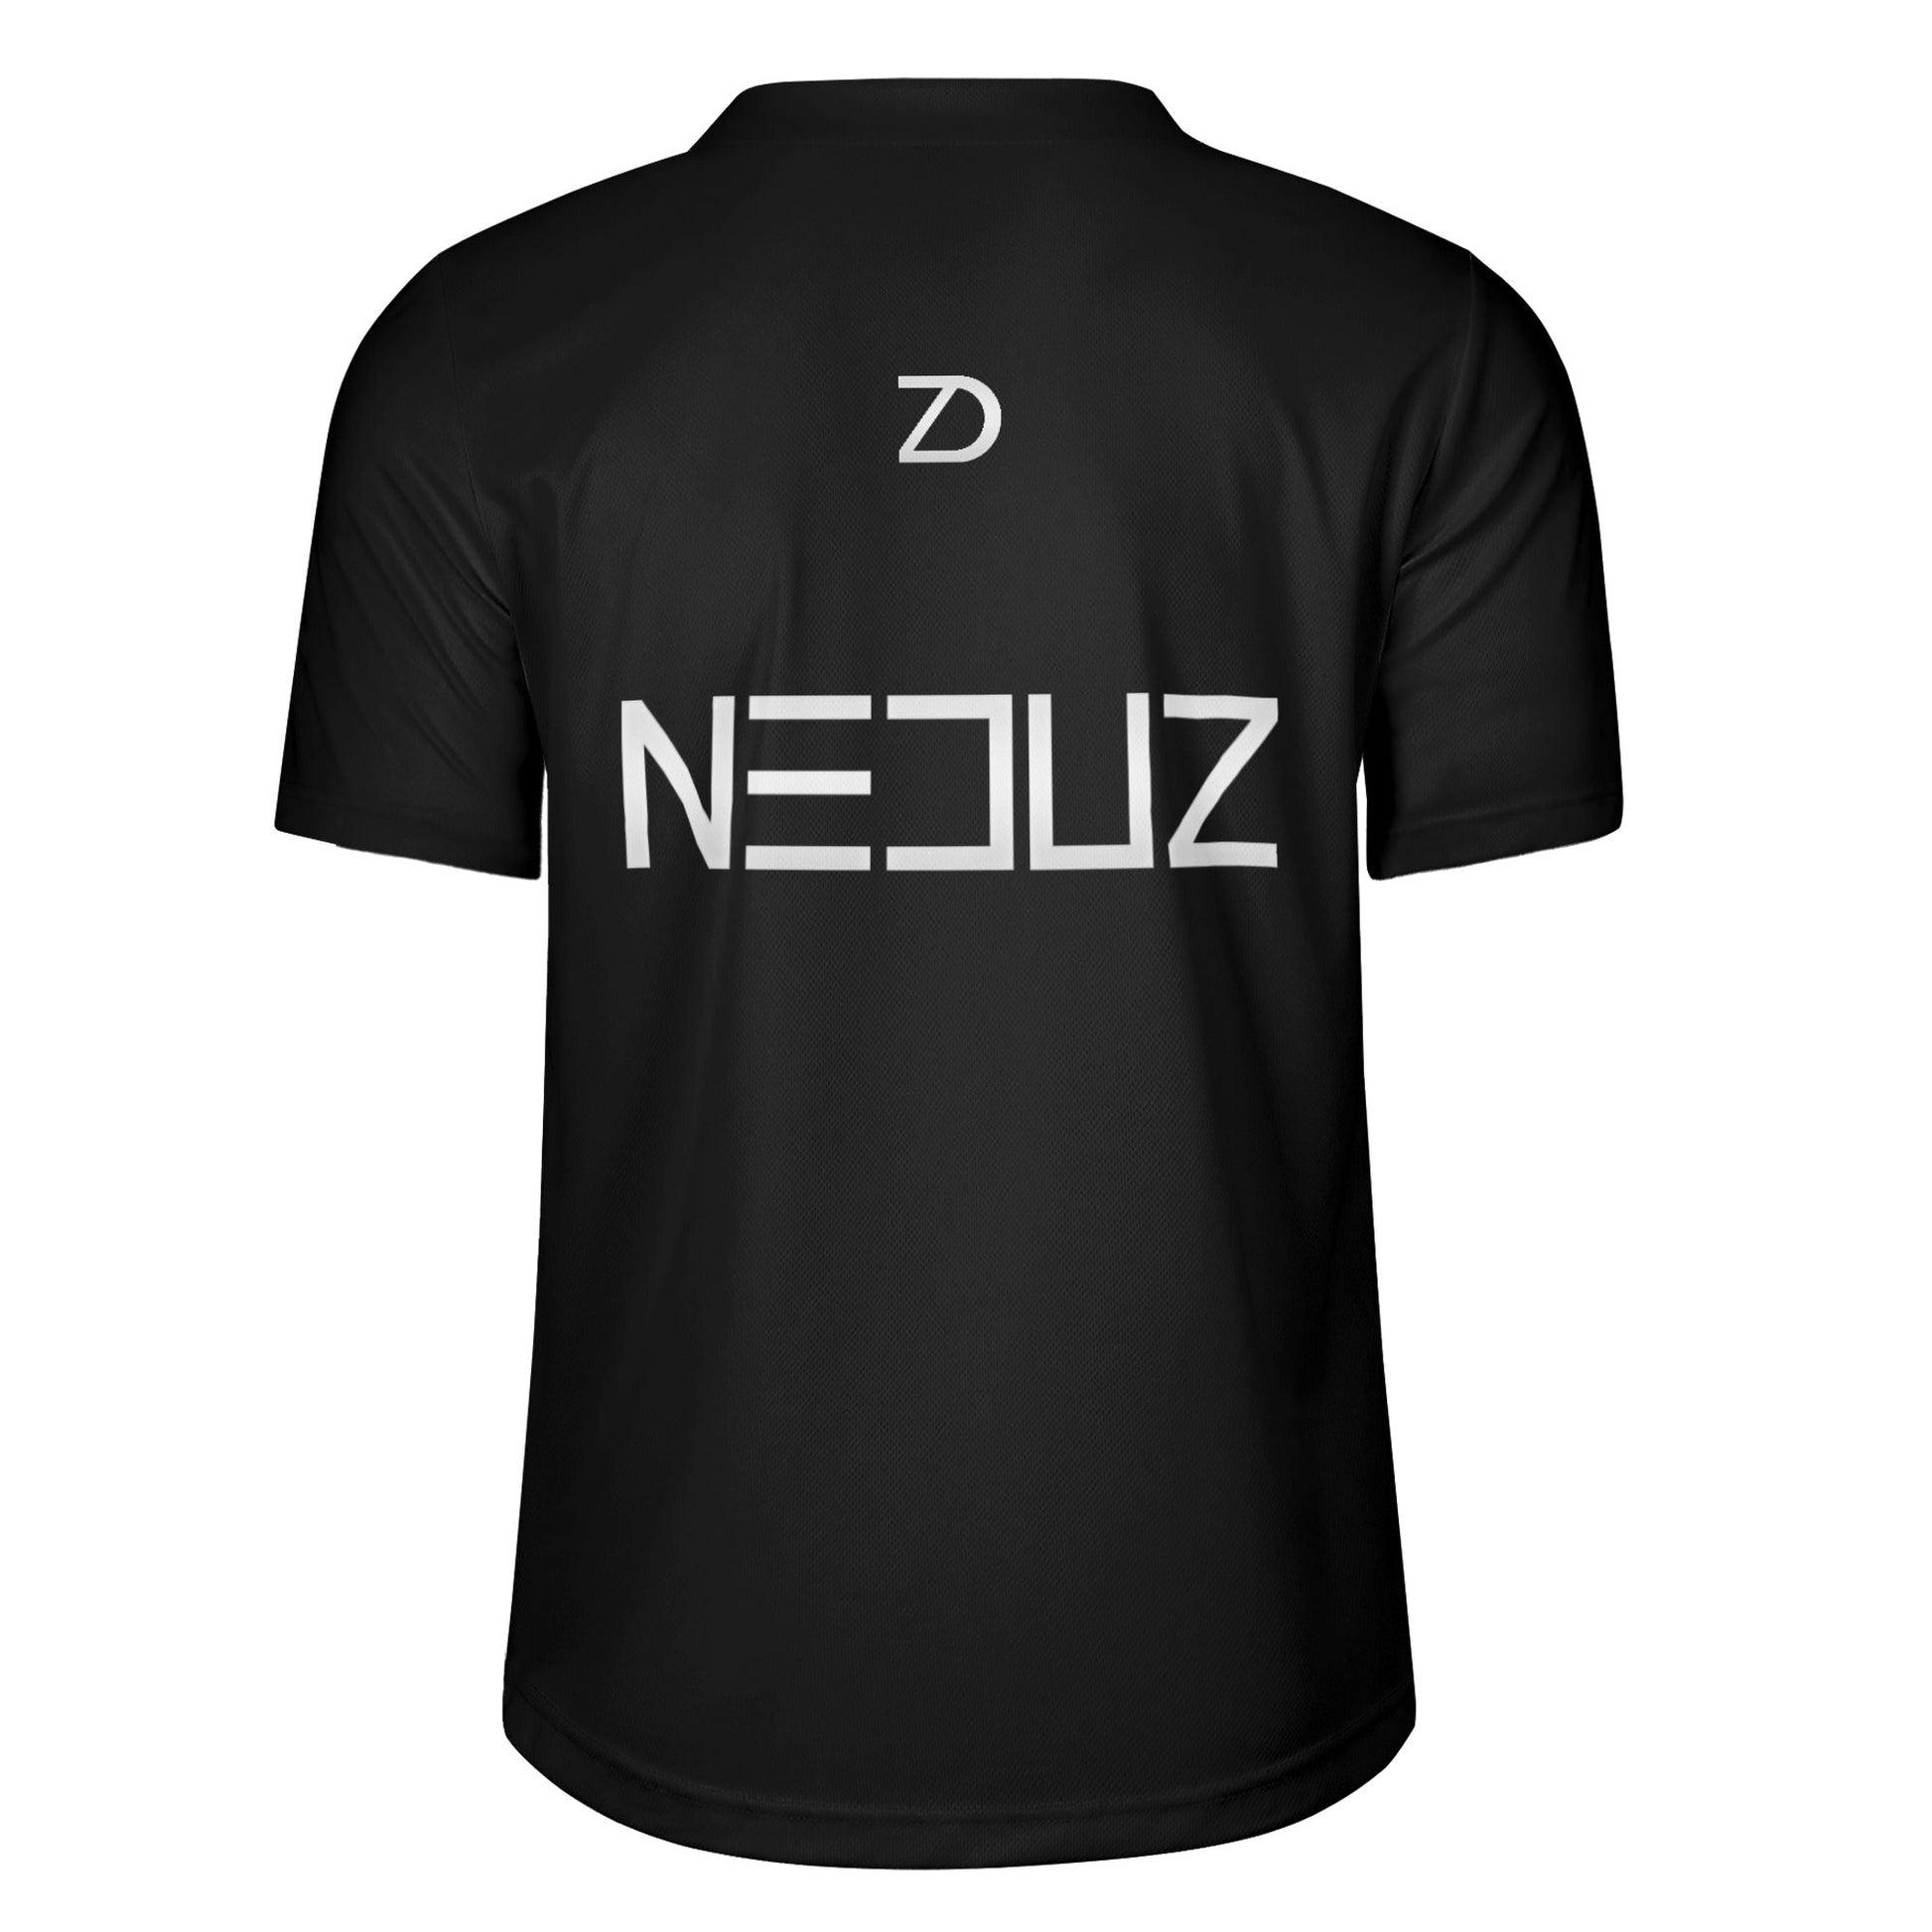 2 Mens All Over Printing Rugby Jersey by Neduz Designs